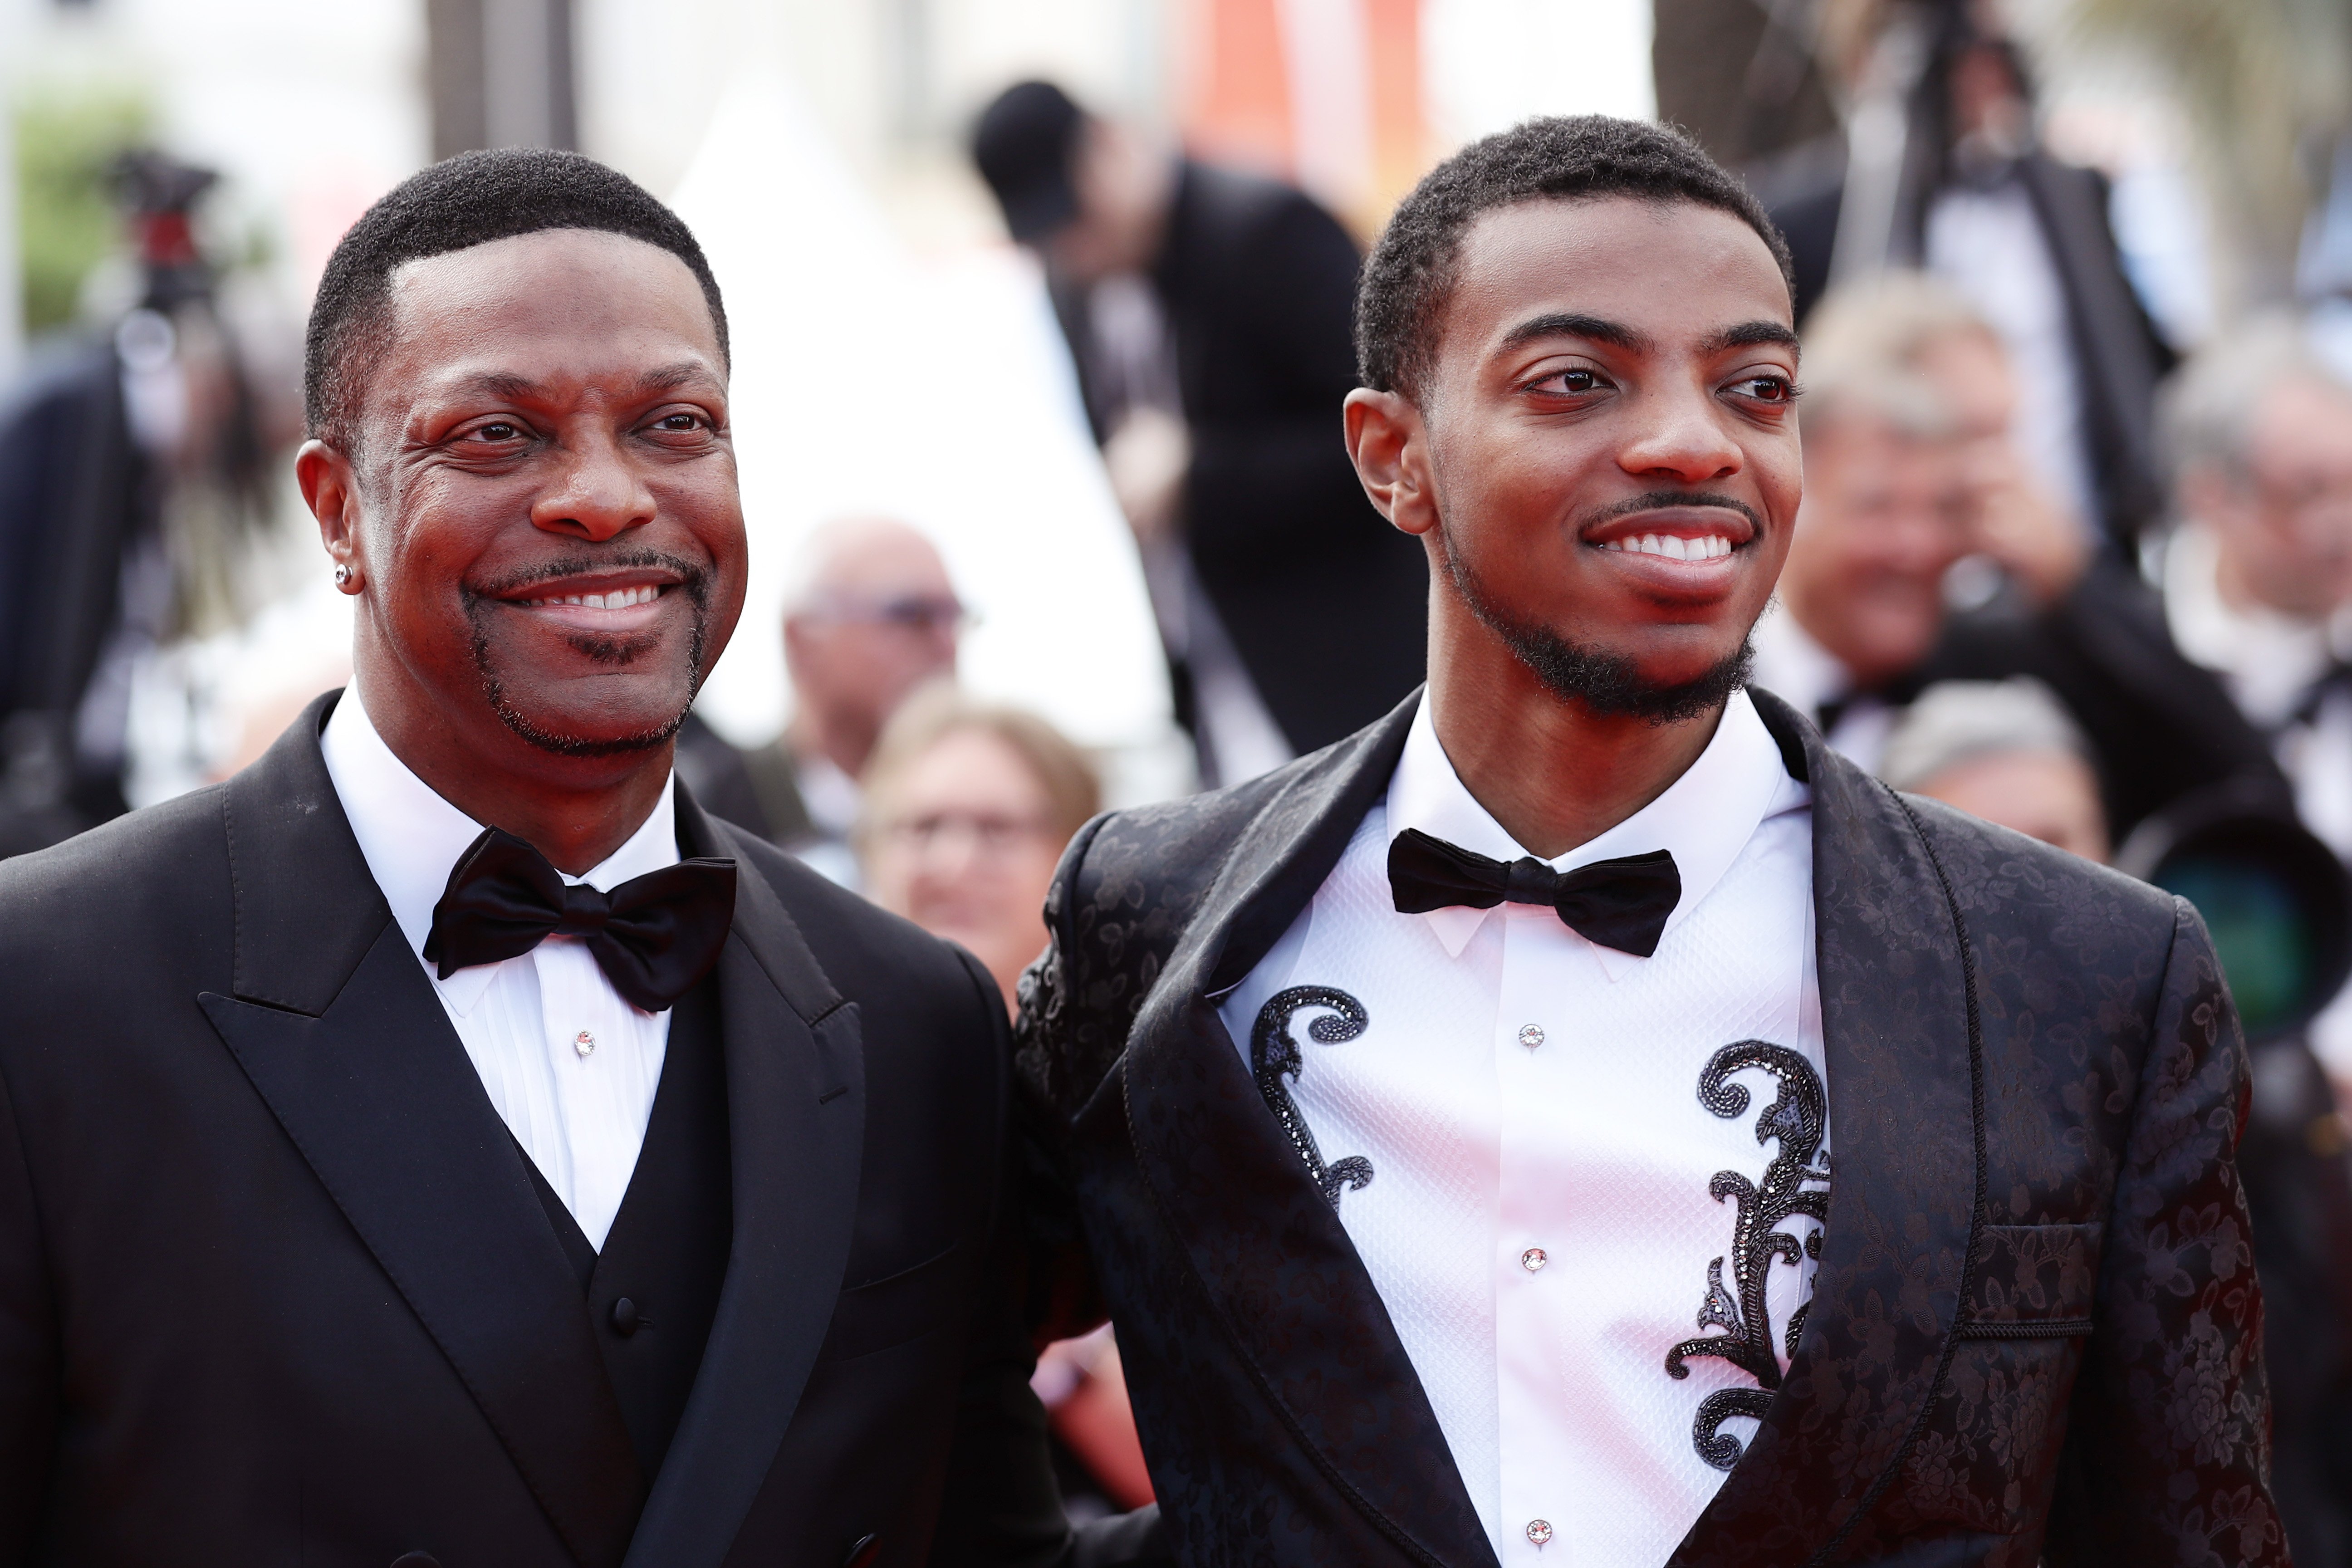 Chris Tucker and his son Destin Christopher Tucker attend the screening of "Once Upon A Time In Hollywood" during the 72nd annual Cannes Film Festival on May 21, 2019 | Photo: GettyImages